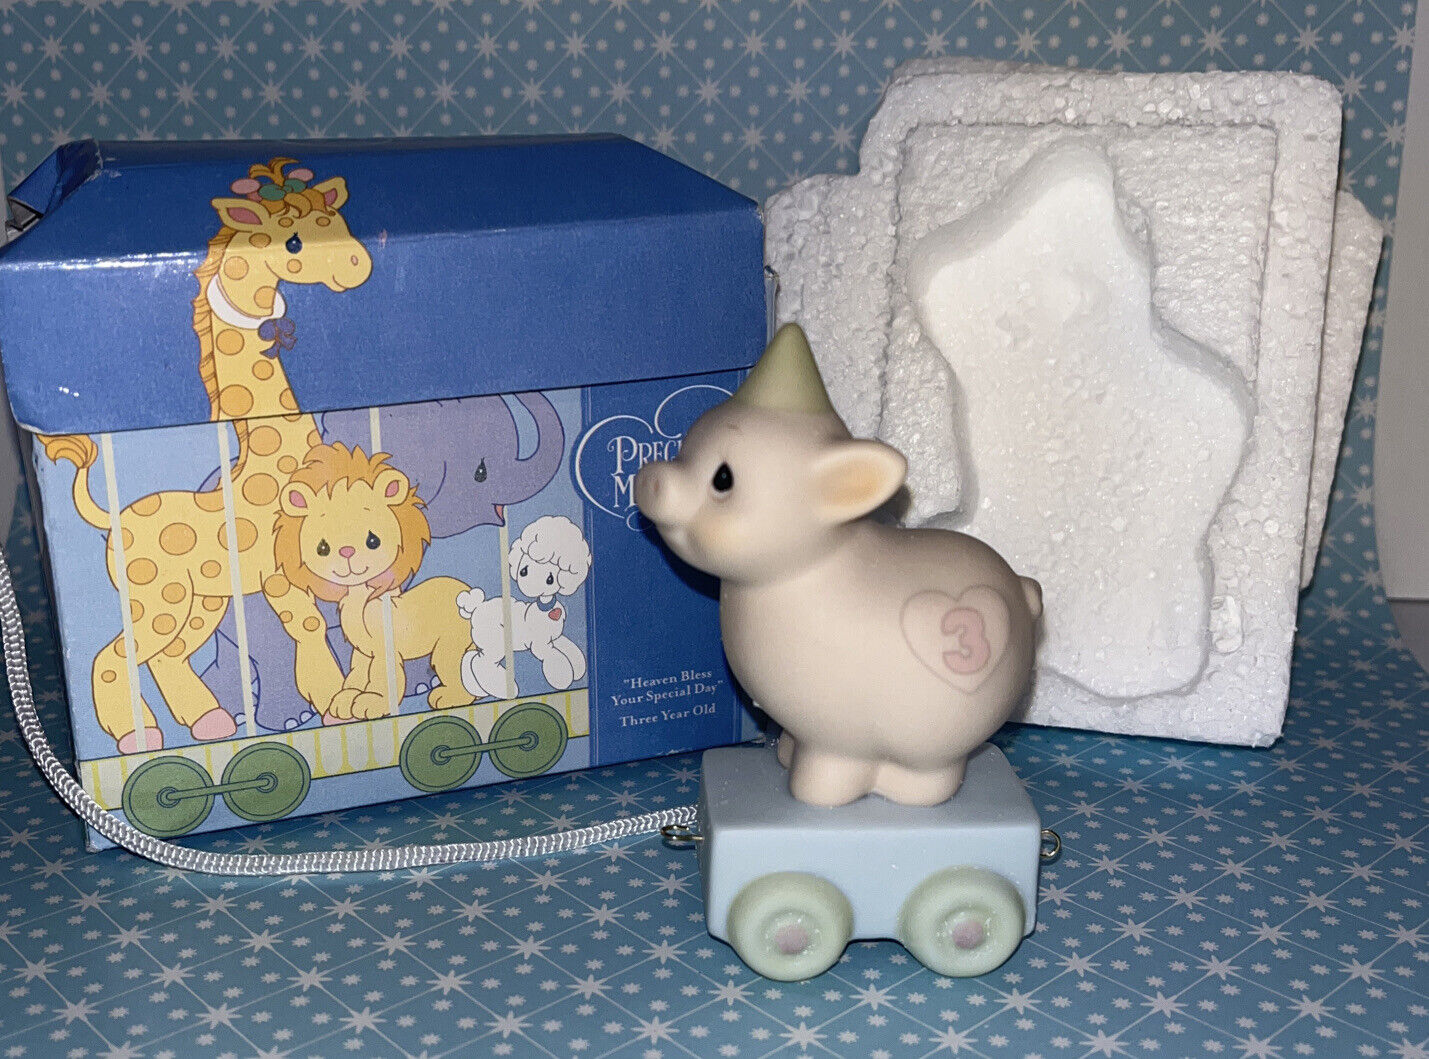 Precious Moments Birthday Train Age 3 Pig "Heaven Bless Your Special Day" 15954